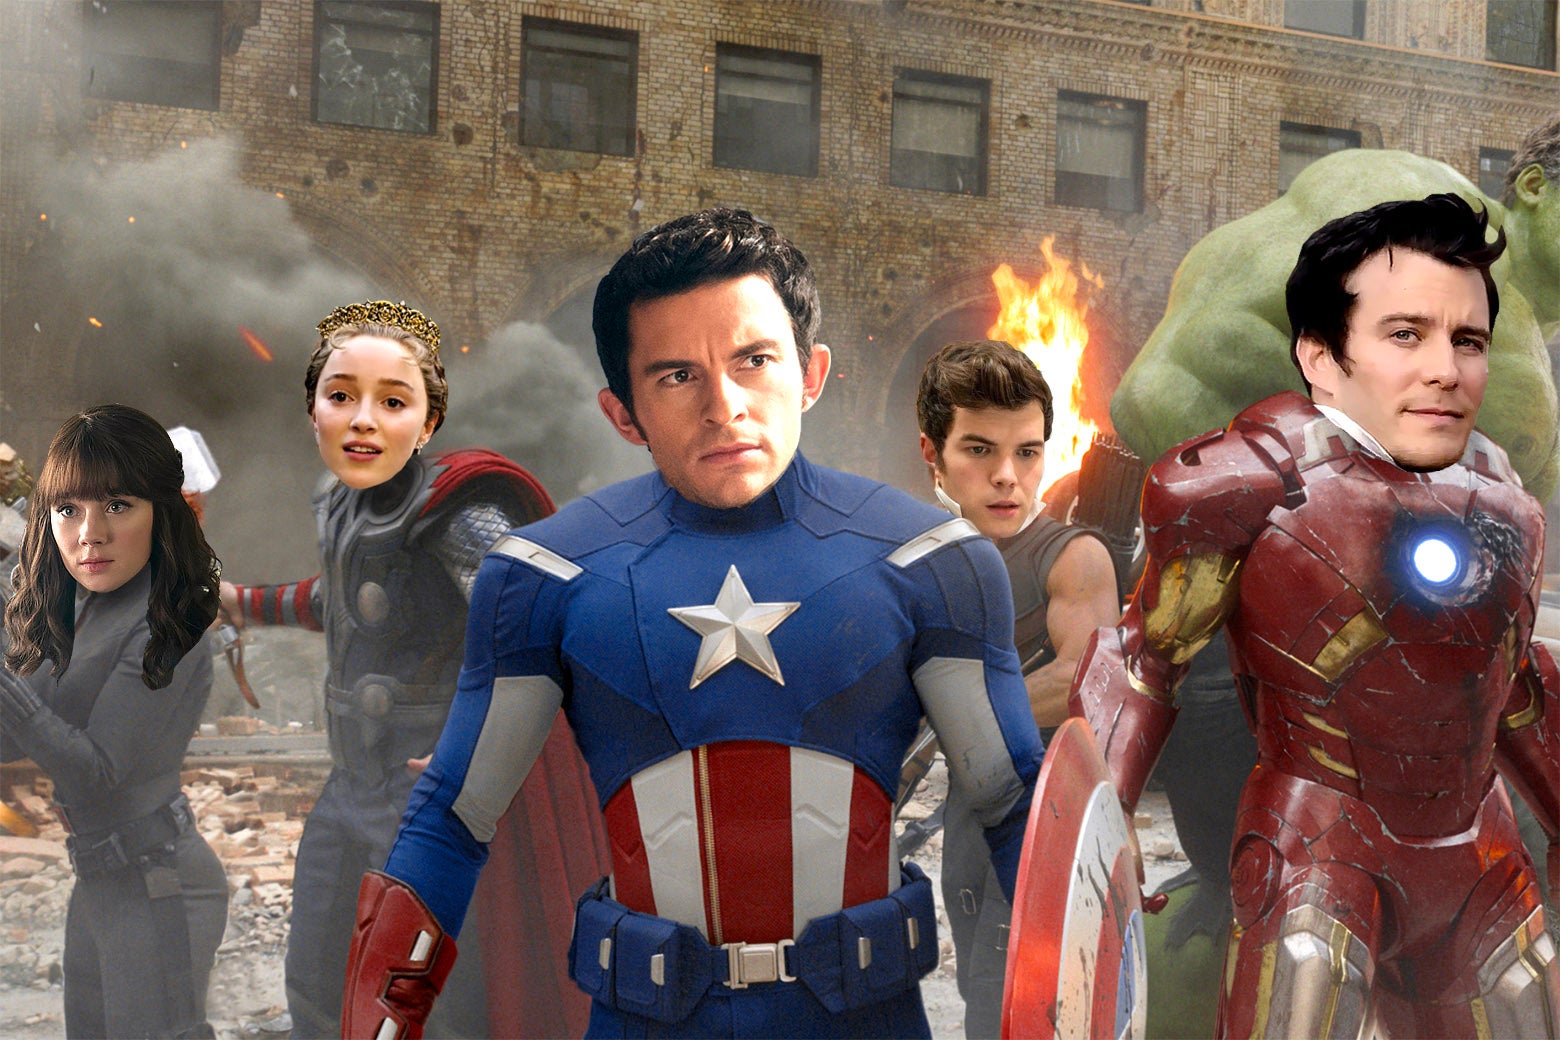 Characters from Netflix's Bridgerton's heads are positioned on the bodies of superheroes from the Avengers. Claudia Jessie as Black Widow, Phoebe Dynevor as Thor, Jonathan Bailey as Captain America, Luke Newton as Hawkeye, Luke Thompson as Iron Man.